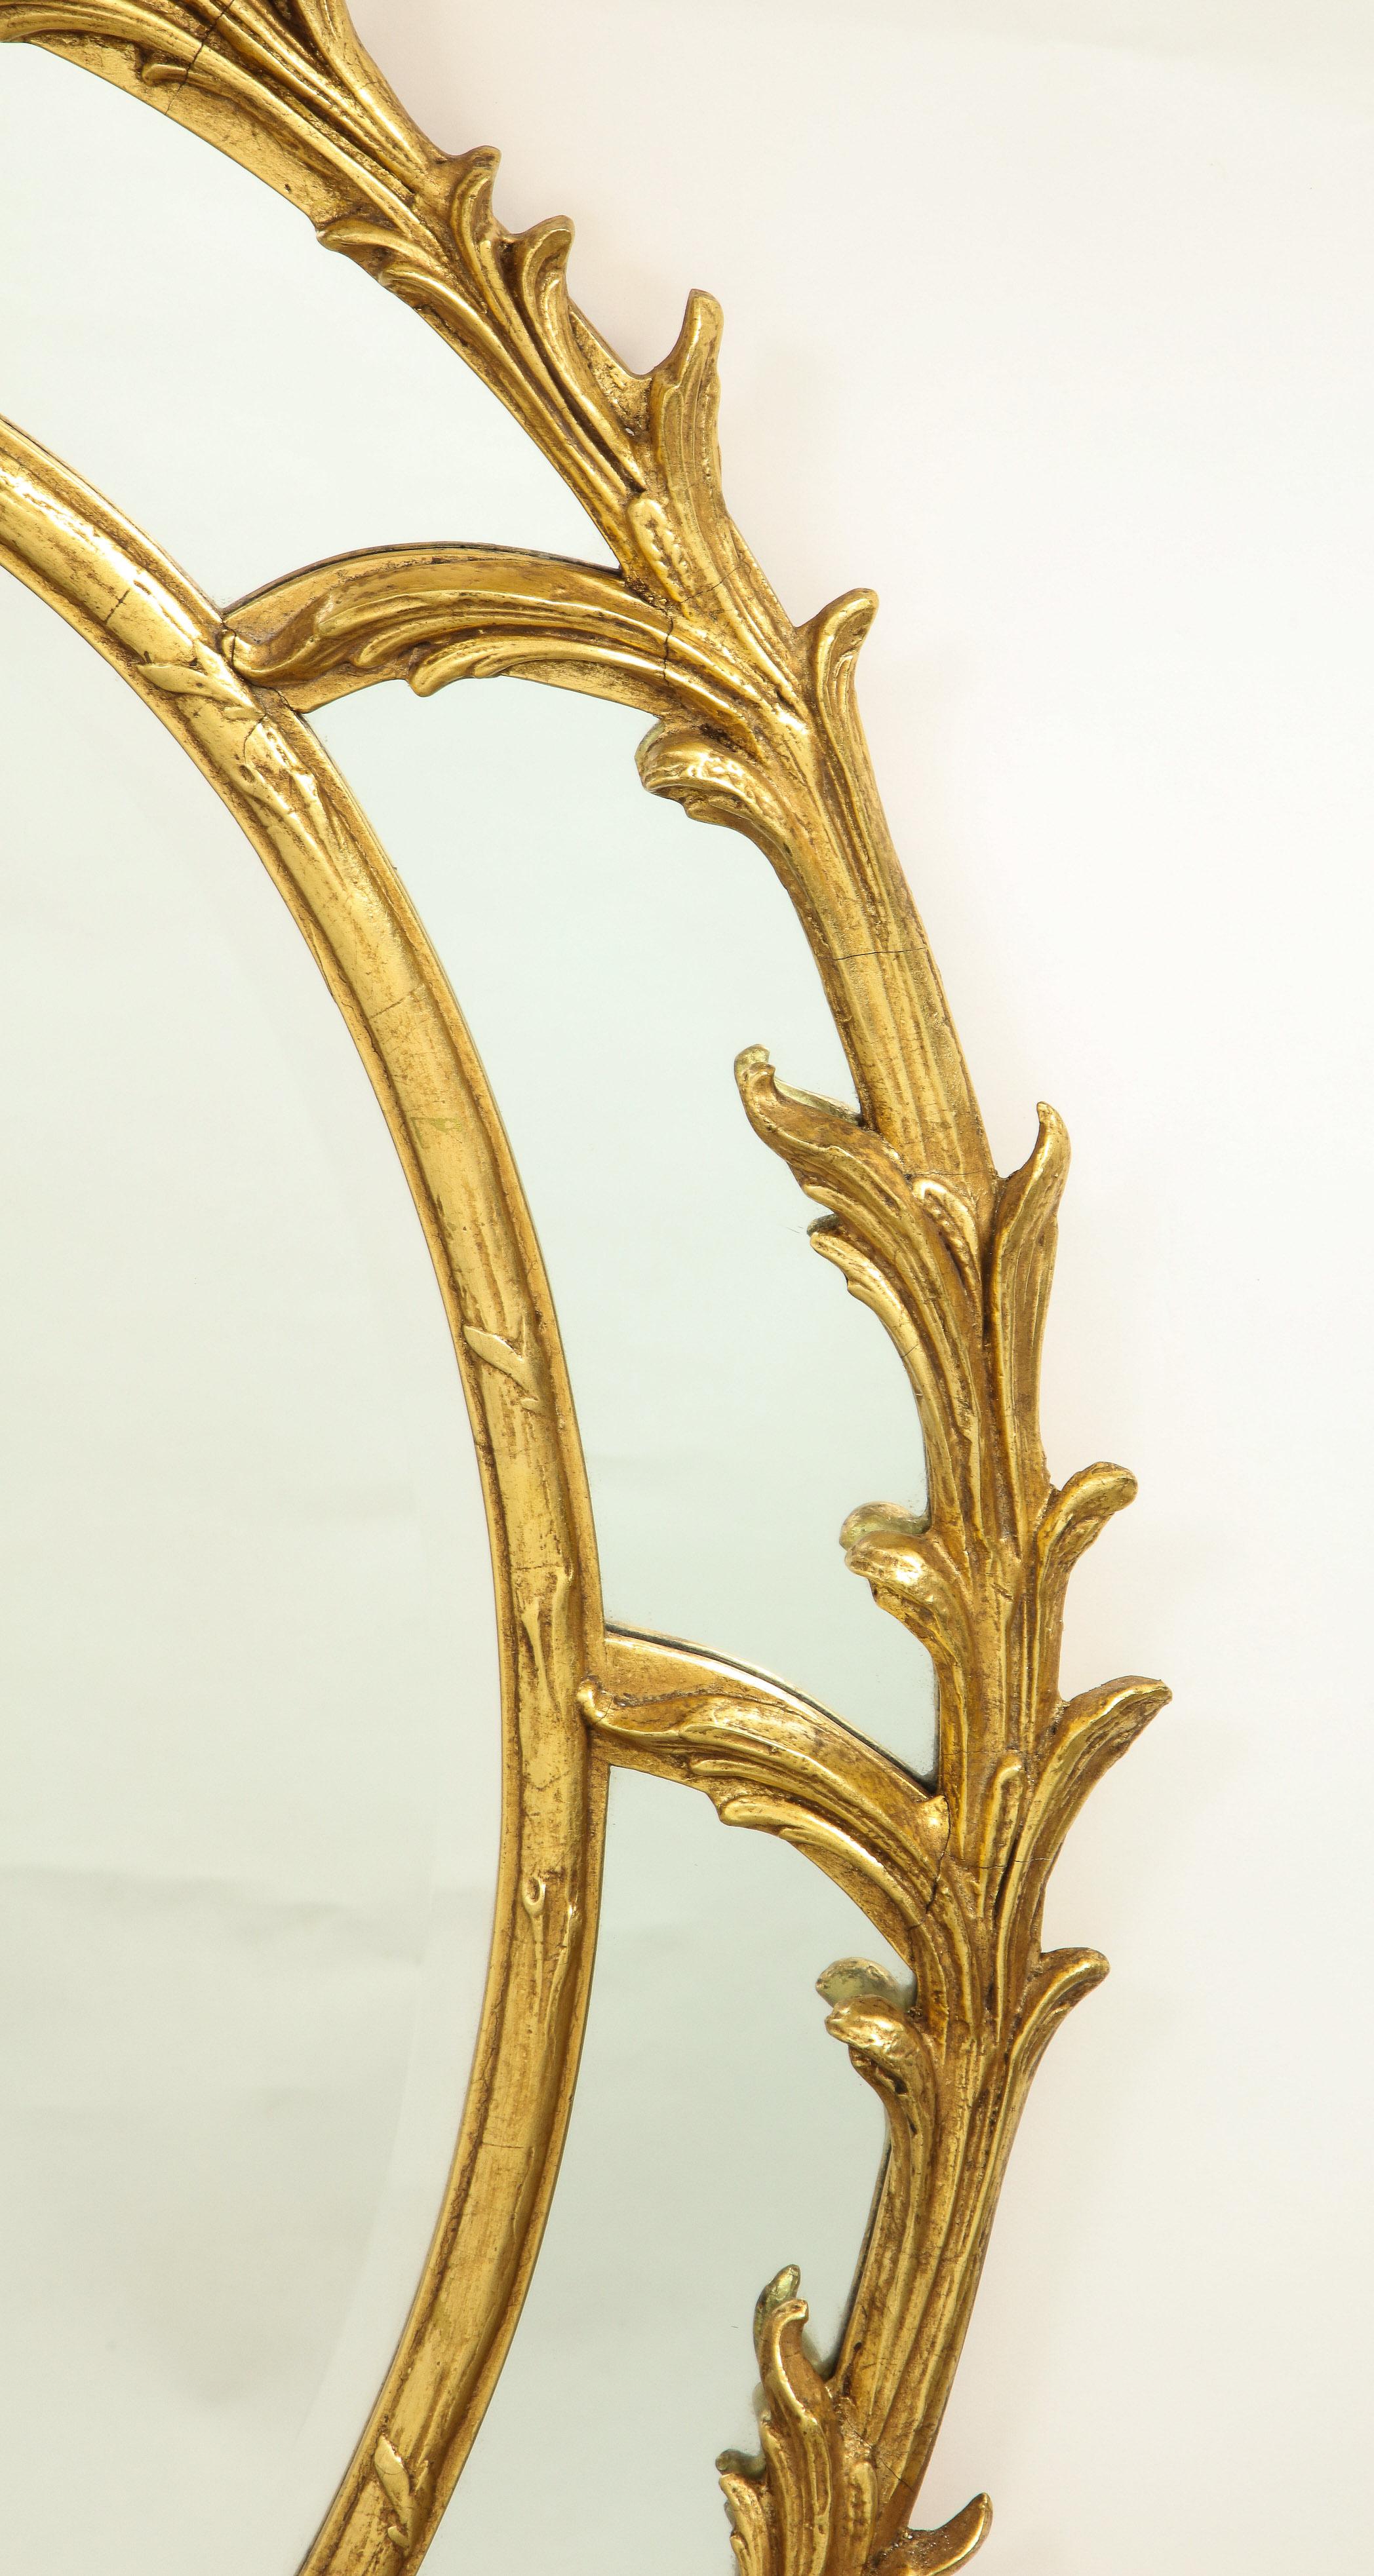 Within a foliate-carved frame surmounted by a foliate clasp. Mounted with hanging wire on back.